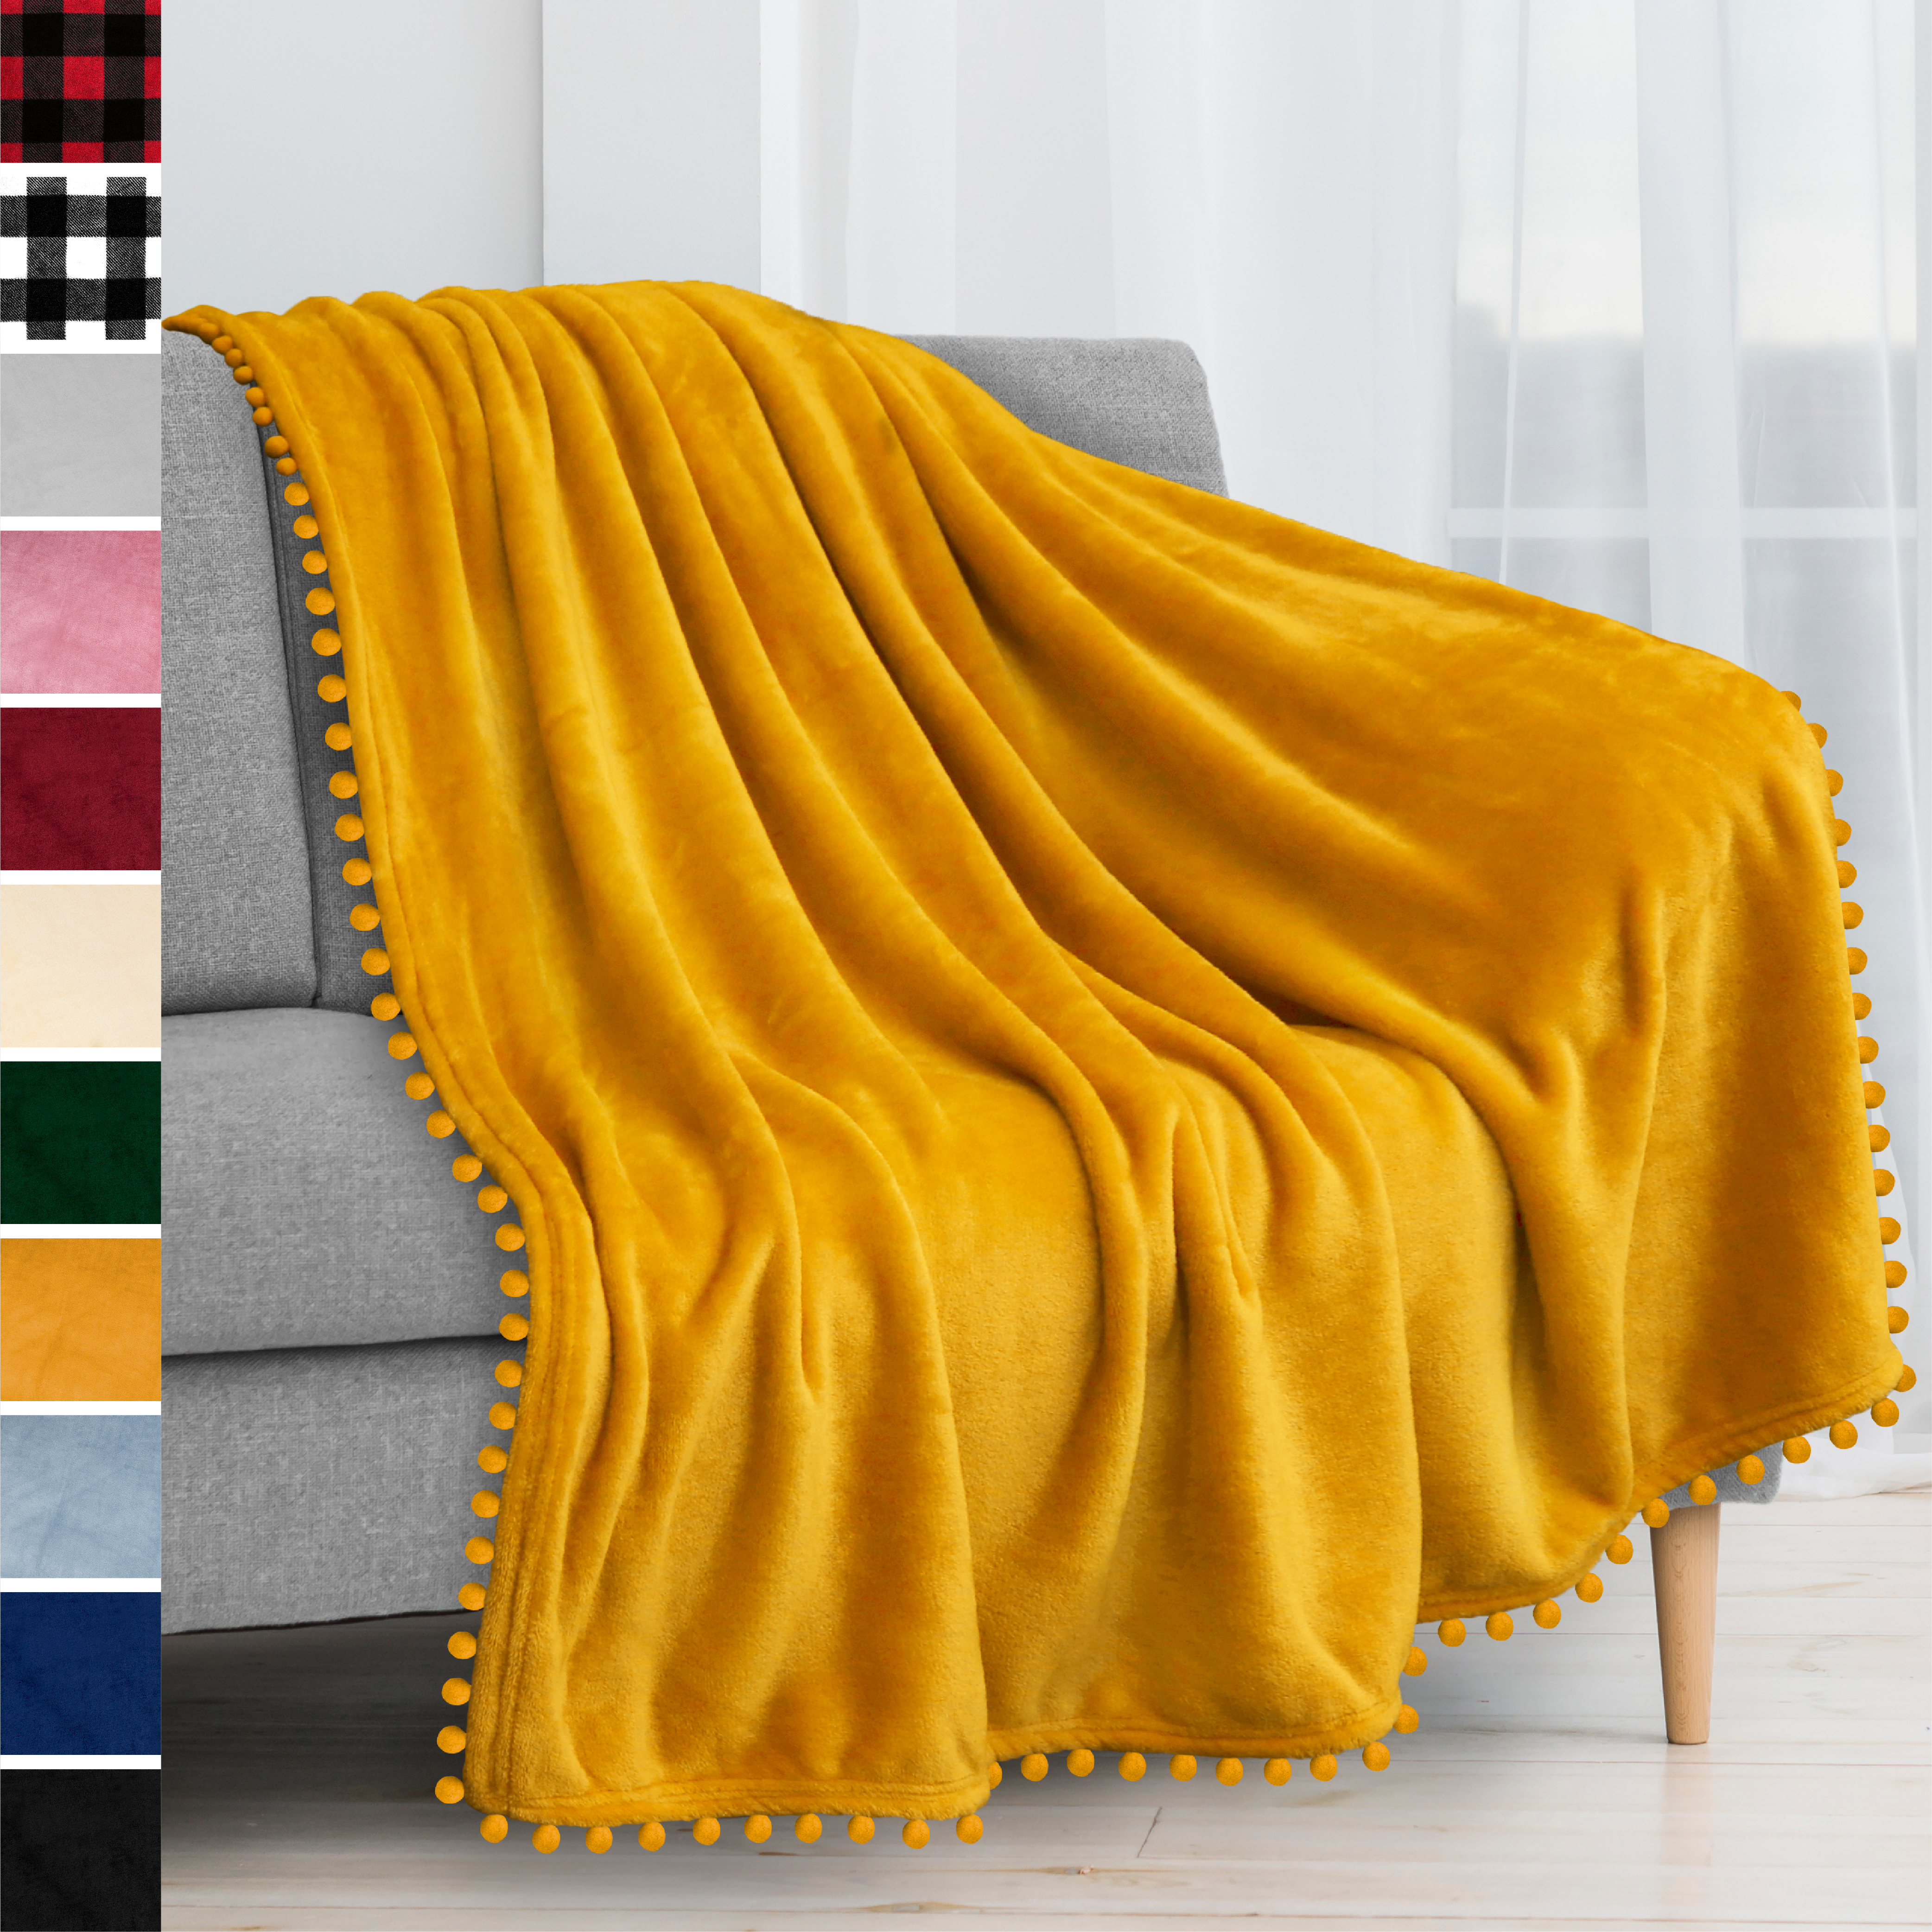 thumbnail 78 - Fleece Throw Blanket with Pom Pom Fringe Super Soft Lightweight Bed Couch Home